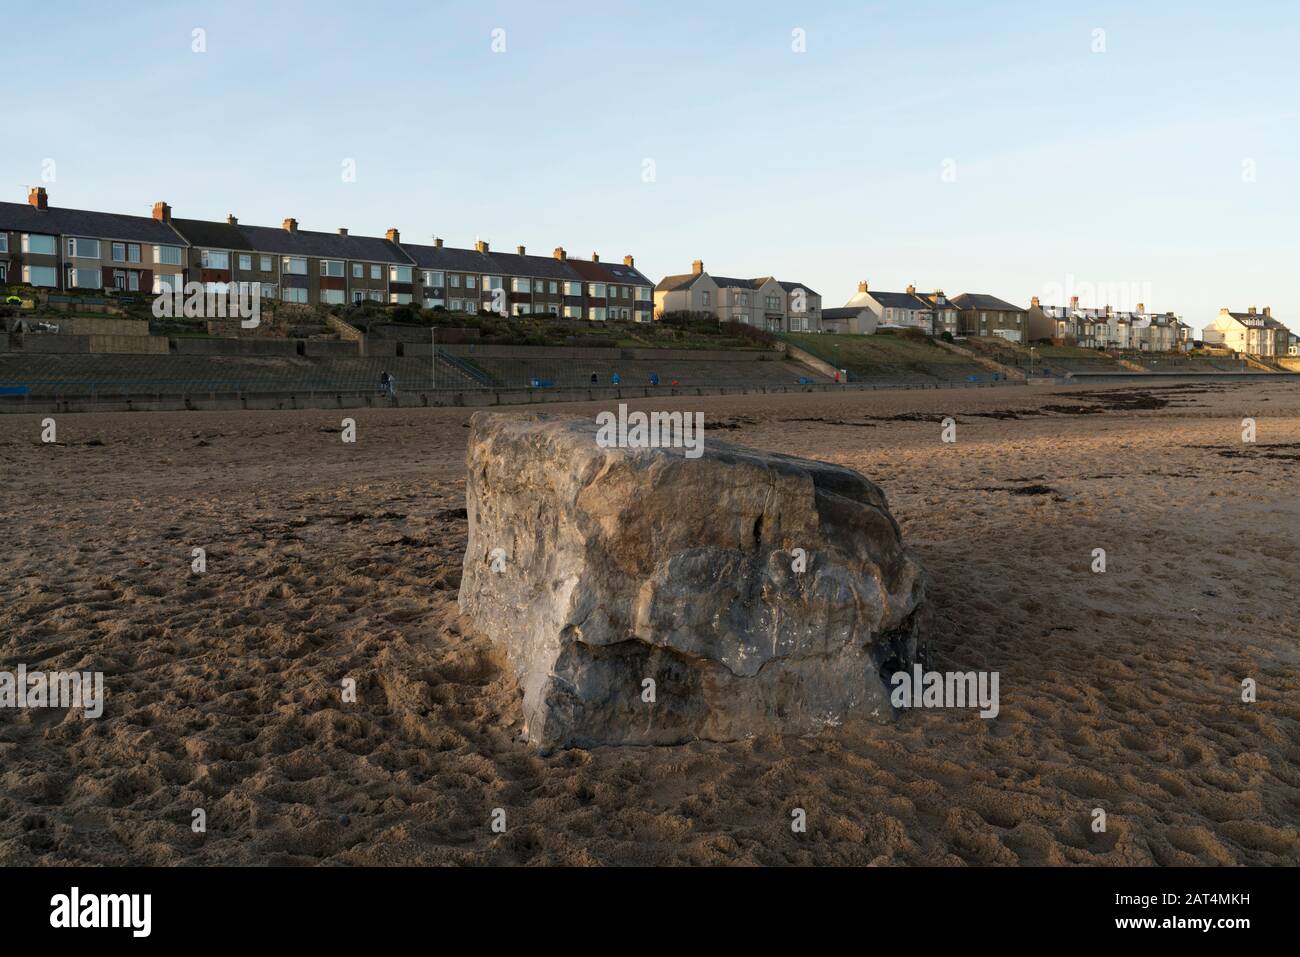 Newbiggin-by-the-sea, et la glace Hunkleton Stone, Northumberland. Banque D'Images